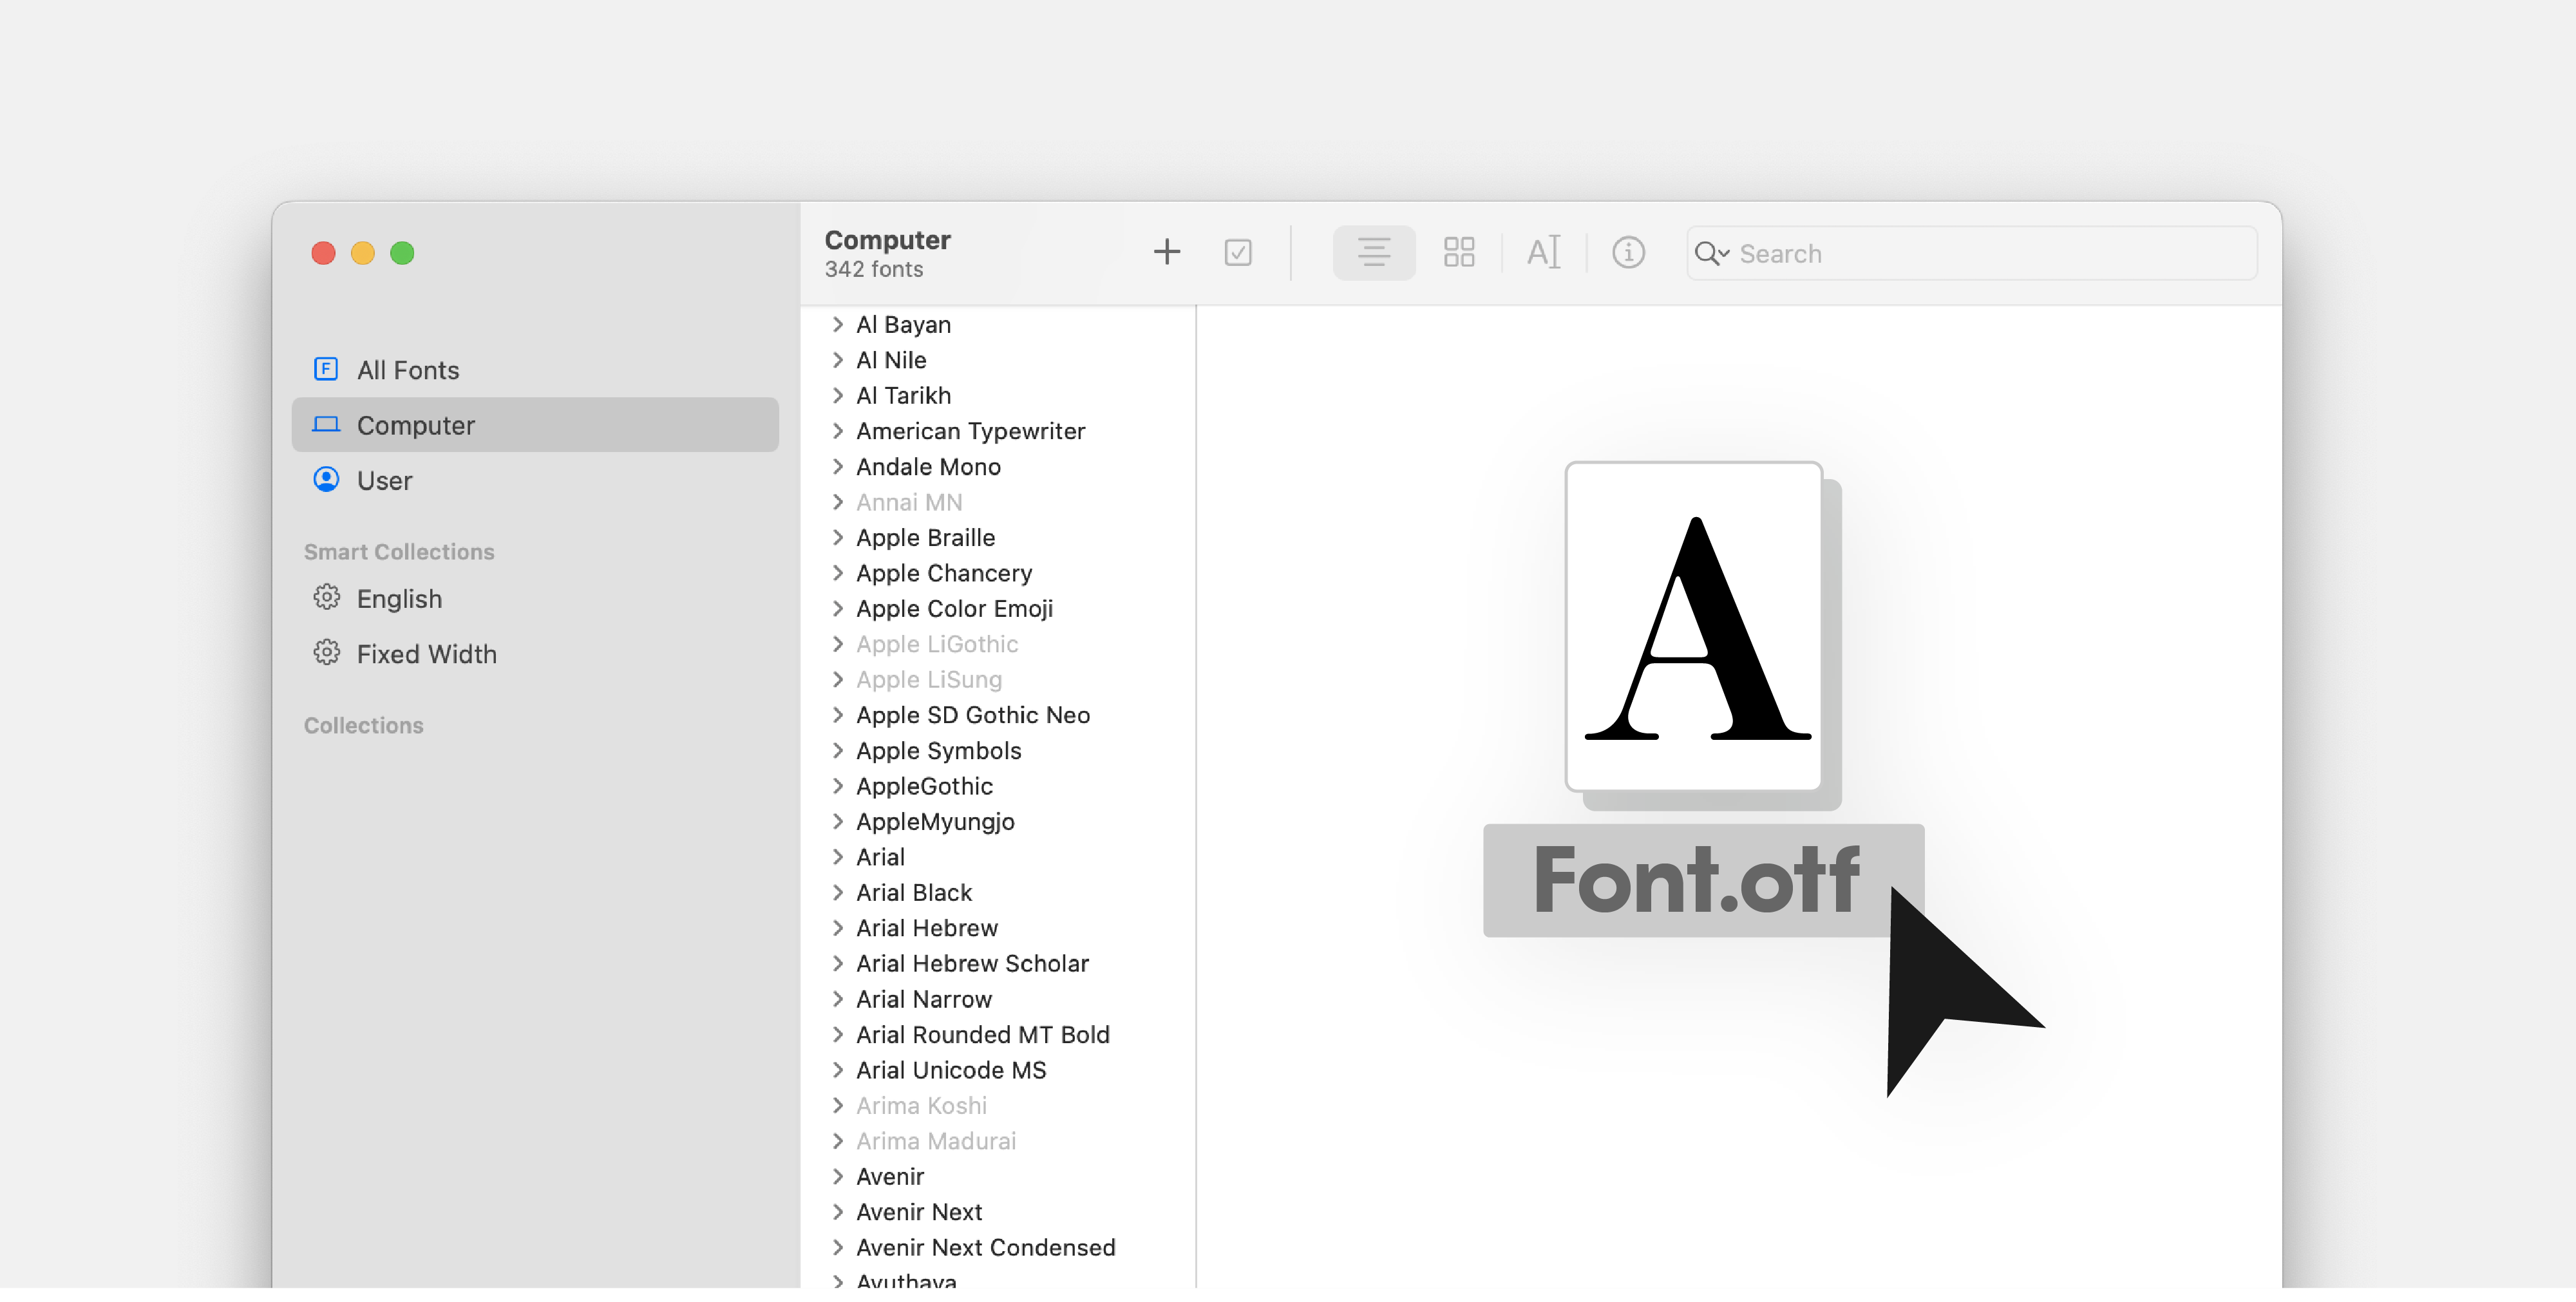 How to install fonts